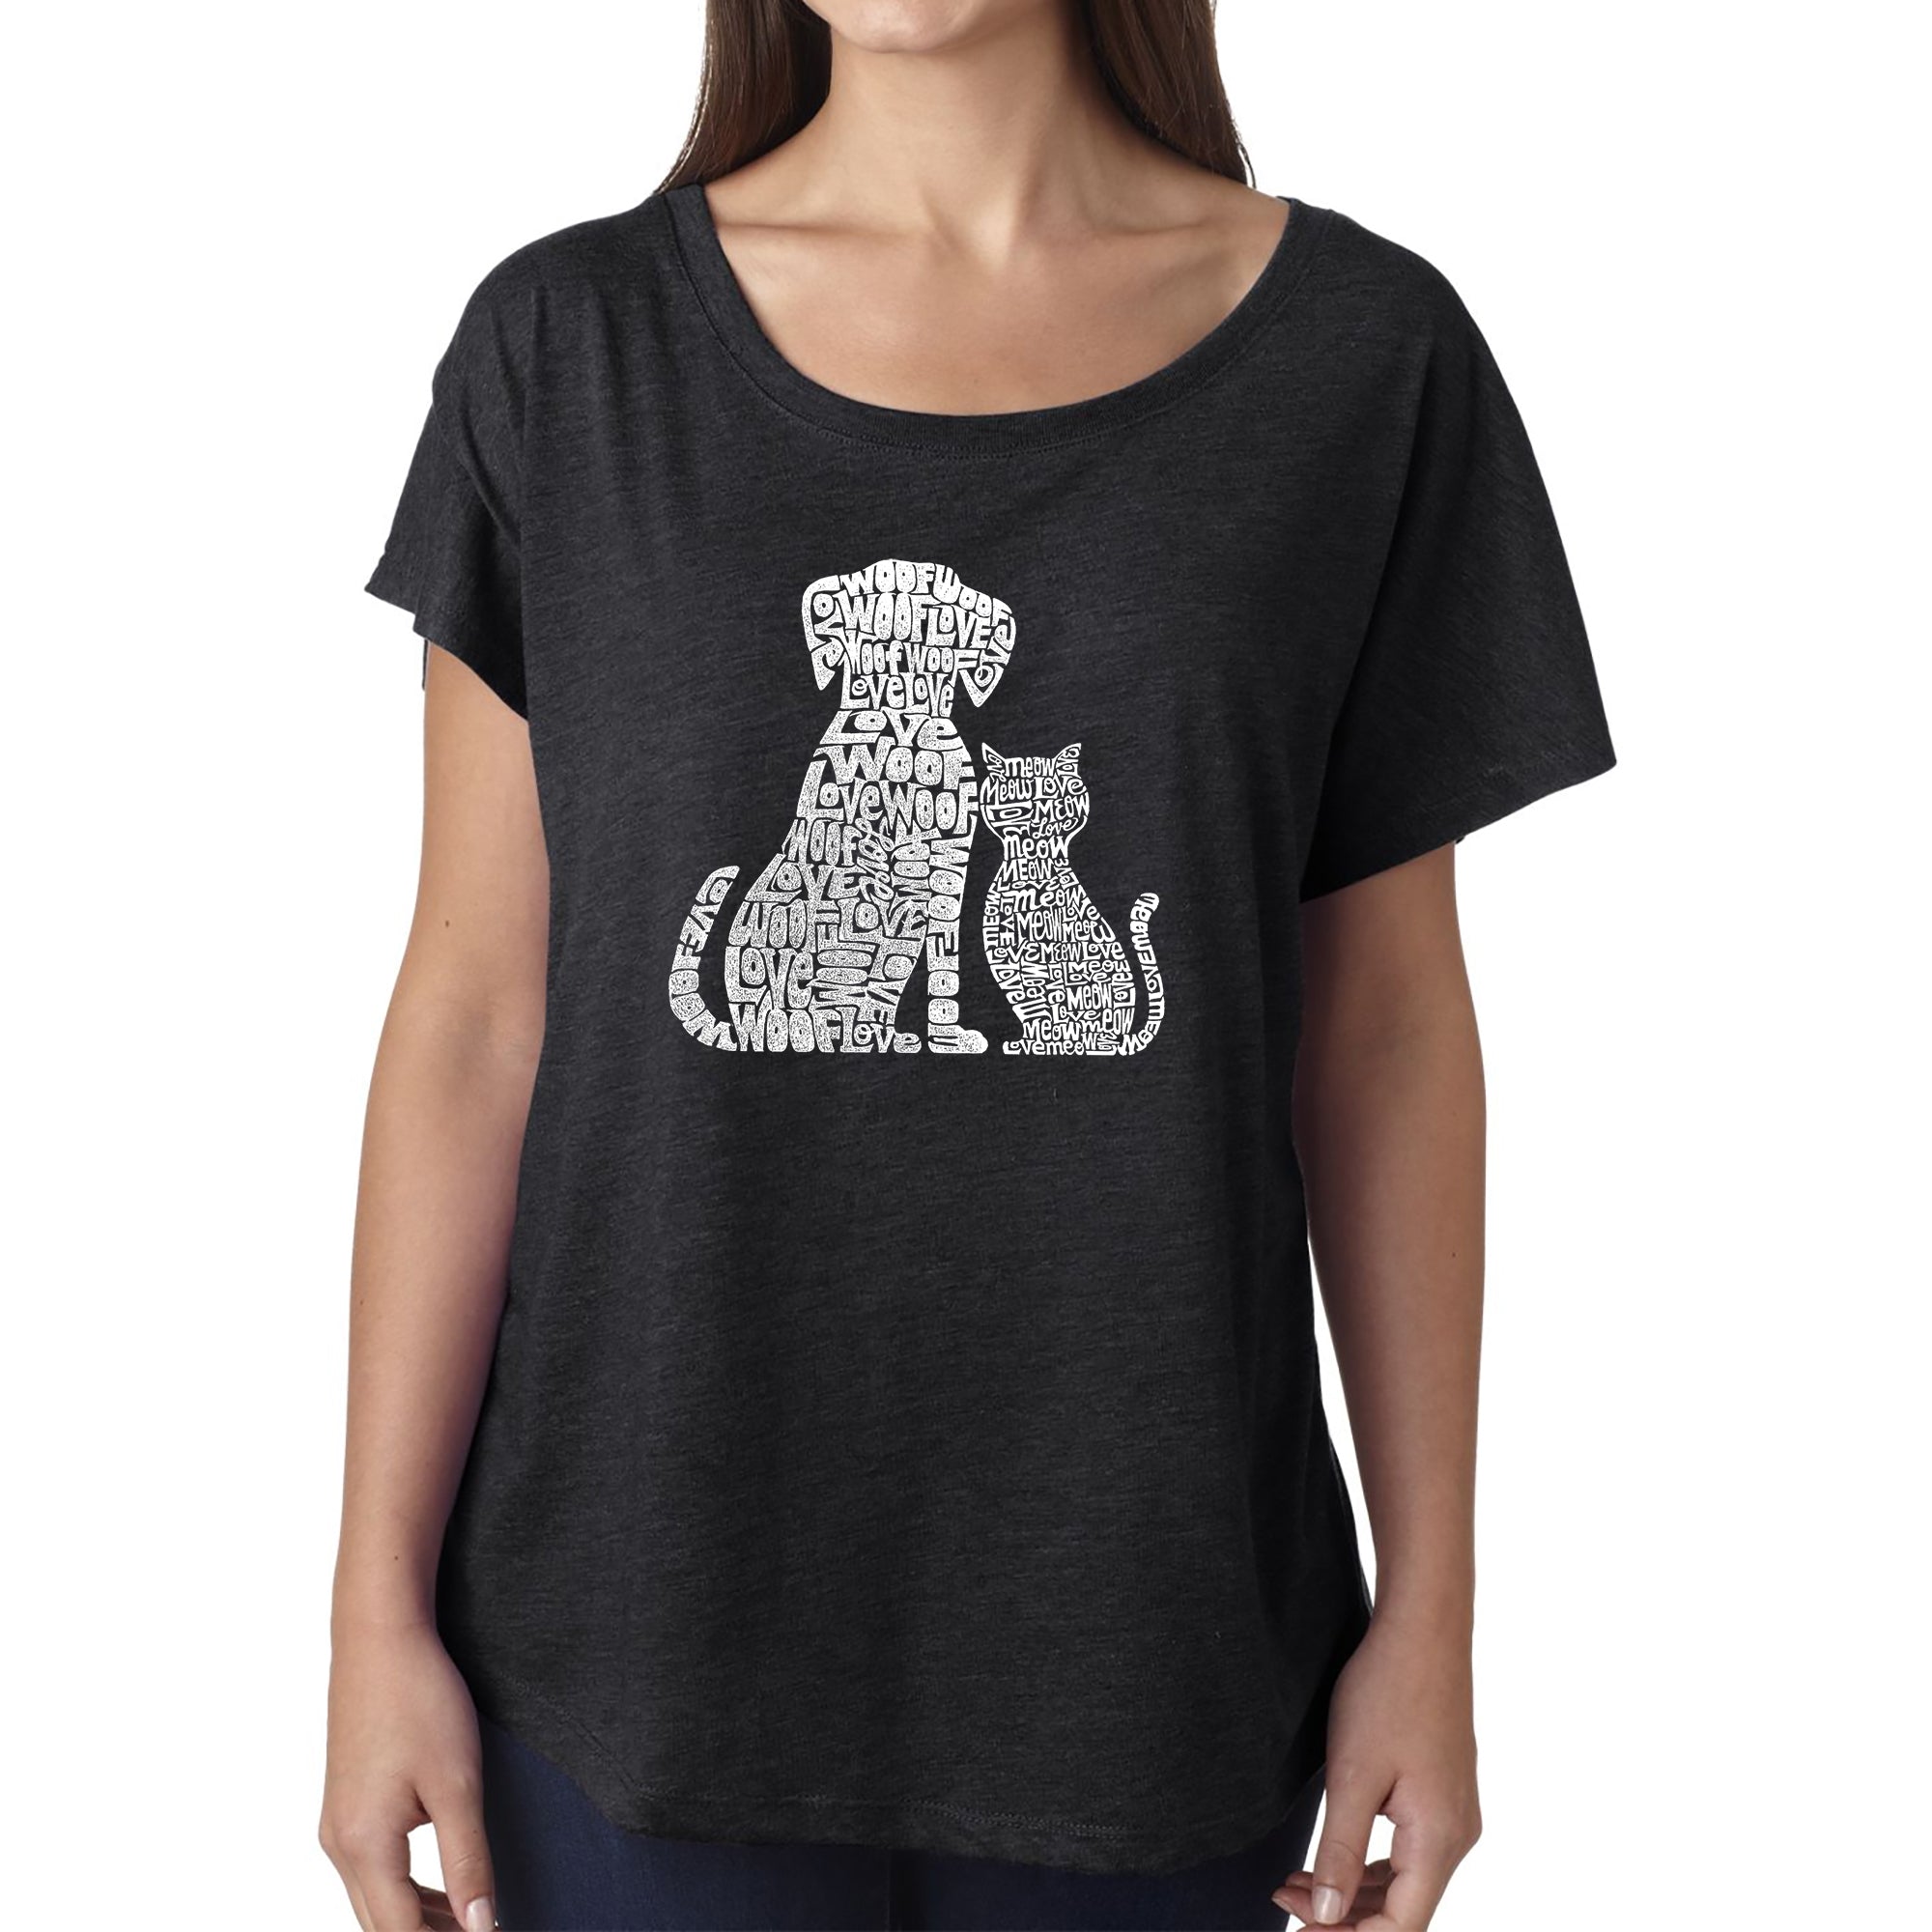 Dogs And Cats - Women's Loose Fit Dolman Cut Word Art Shirt - Navy - Large